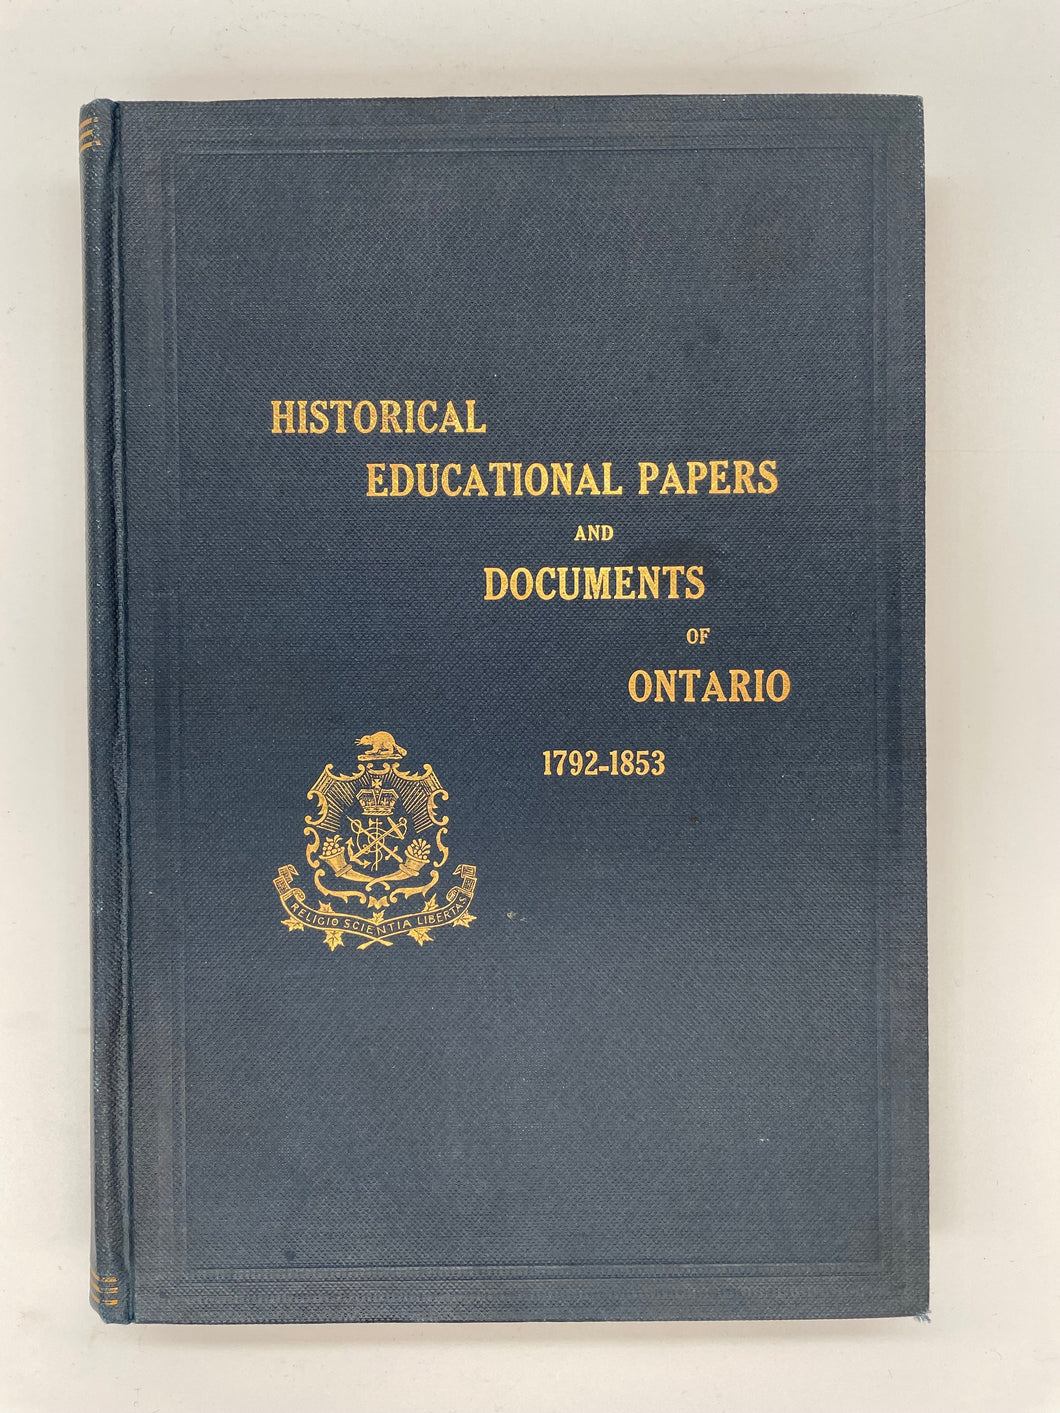 Historical Educational Papers and Documents of Ontario 1792 - 1853 Volume 1